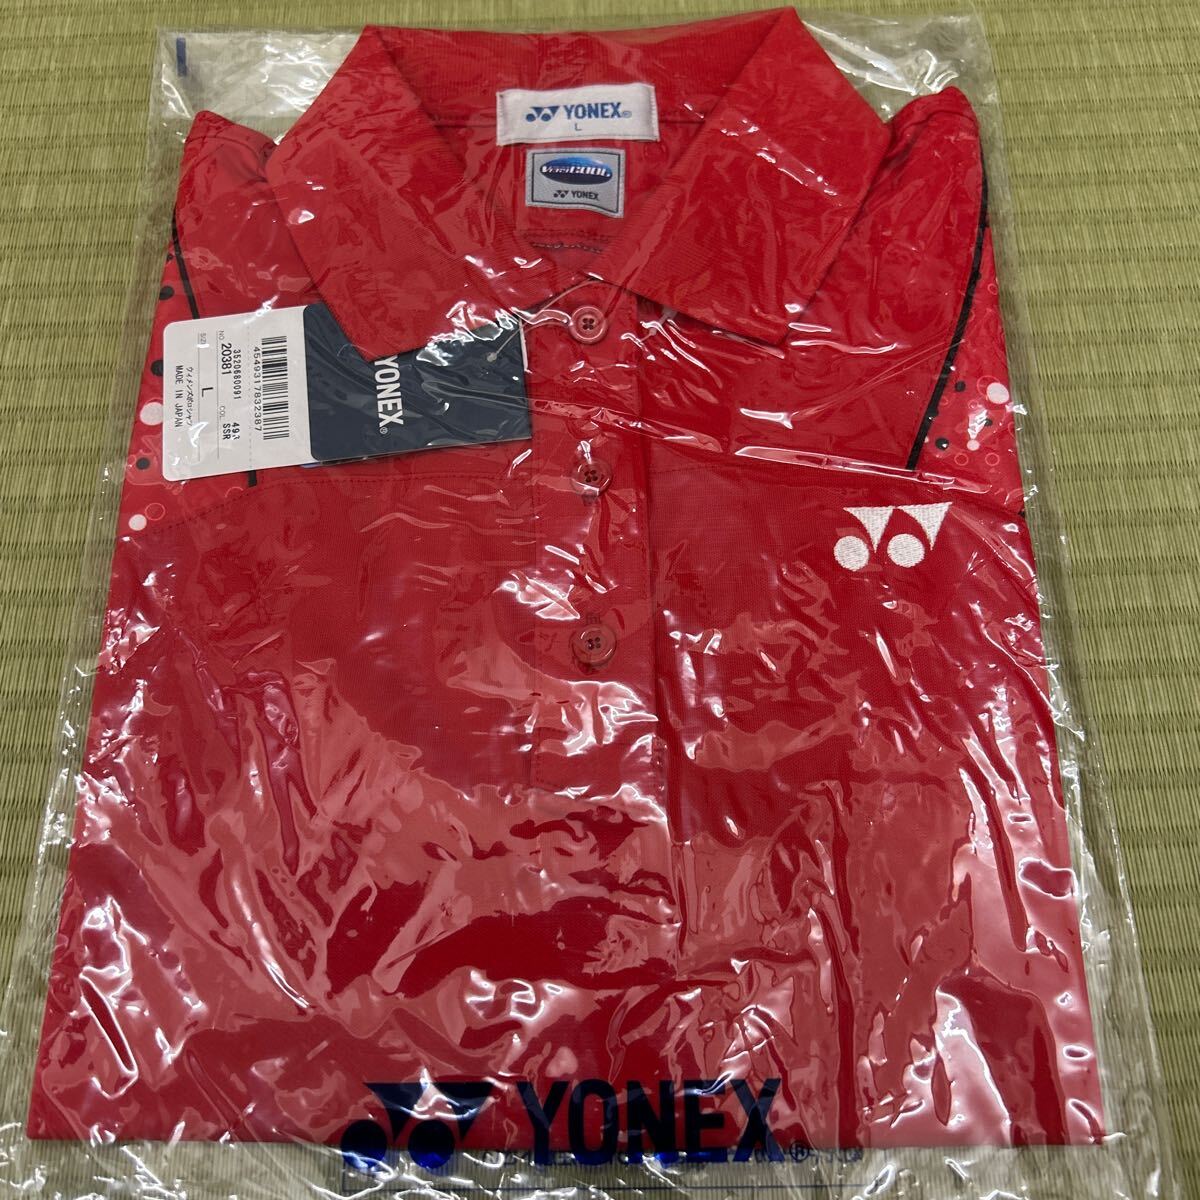  free shipping Yonex game shirt wi men's for women L size popular regular price tax included 7480 jpy. . goods stylish be leak -ru installing made in Japan new goods 